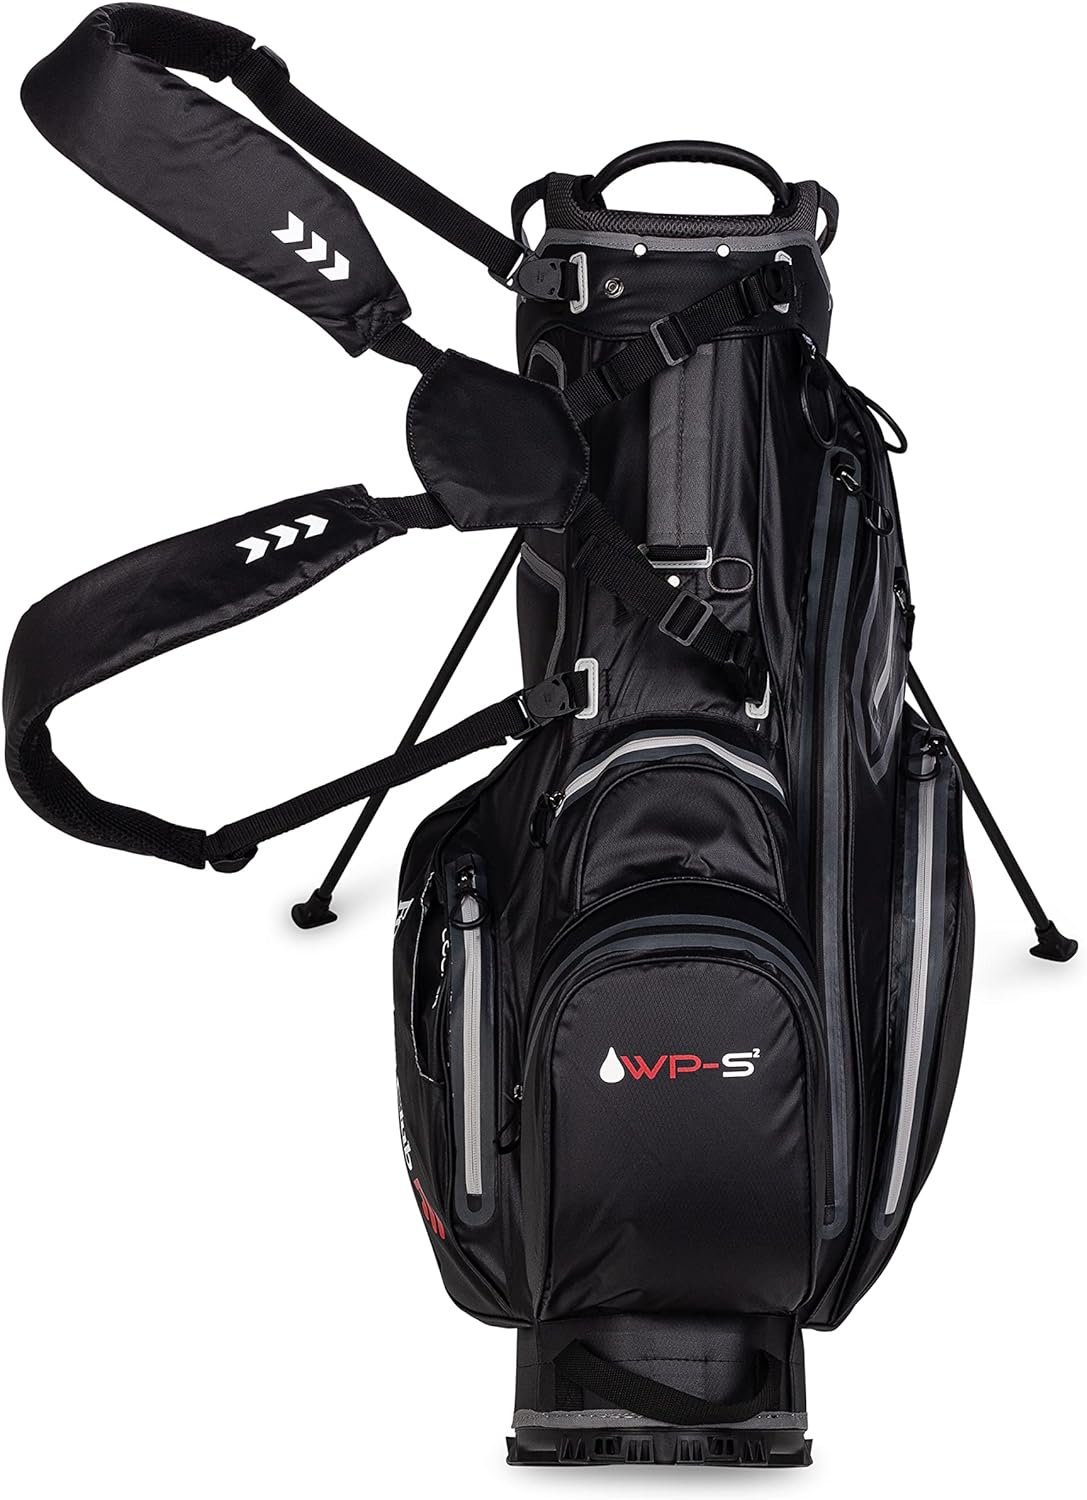 Founders Club WPS2 Waterproof Golf Stand Bag Ultra Dry for Rainy Days on The Golf Course Light Weight 14 Way Full Length Divider with Dual Padded Carry Strap